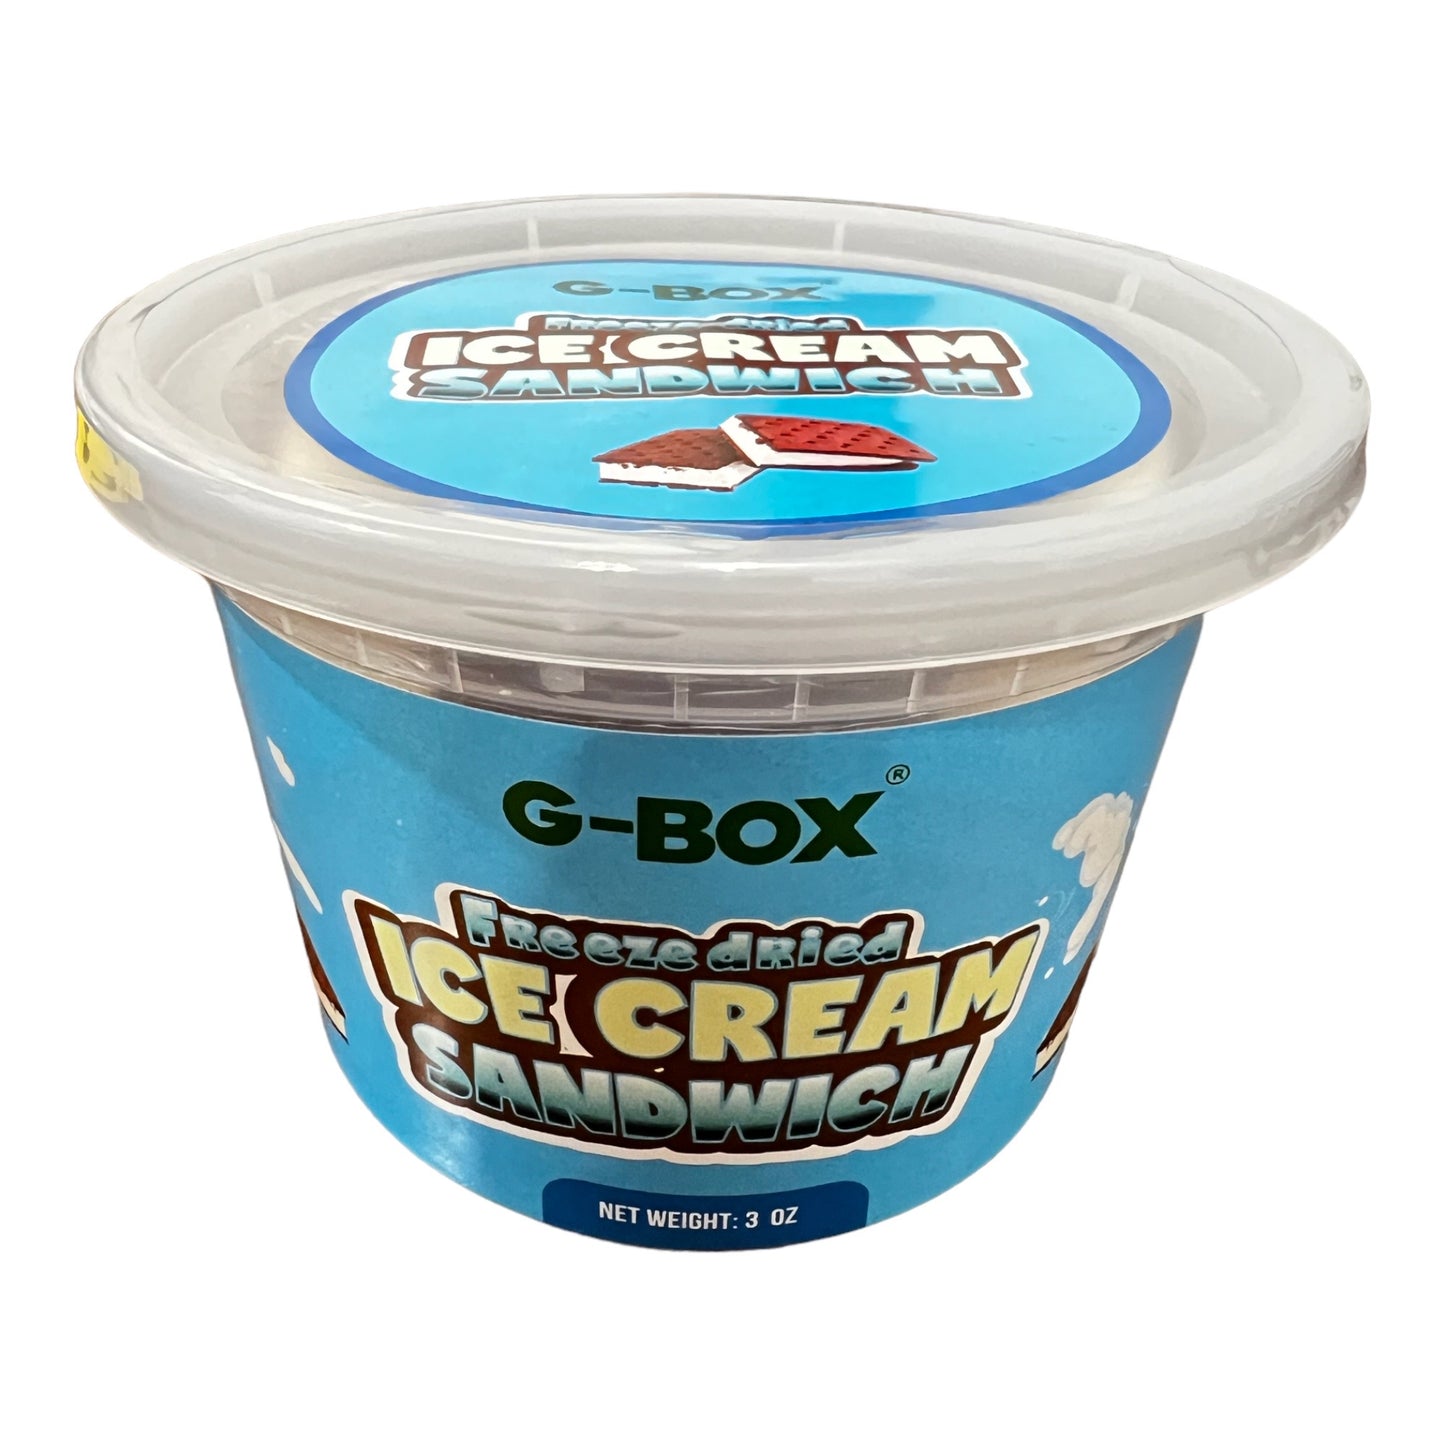 G-Box Freeze Dried Ice Cream Sandwich in Air-tight Sealed Container